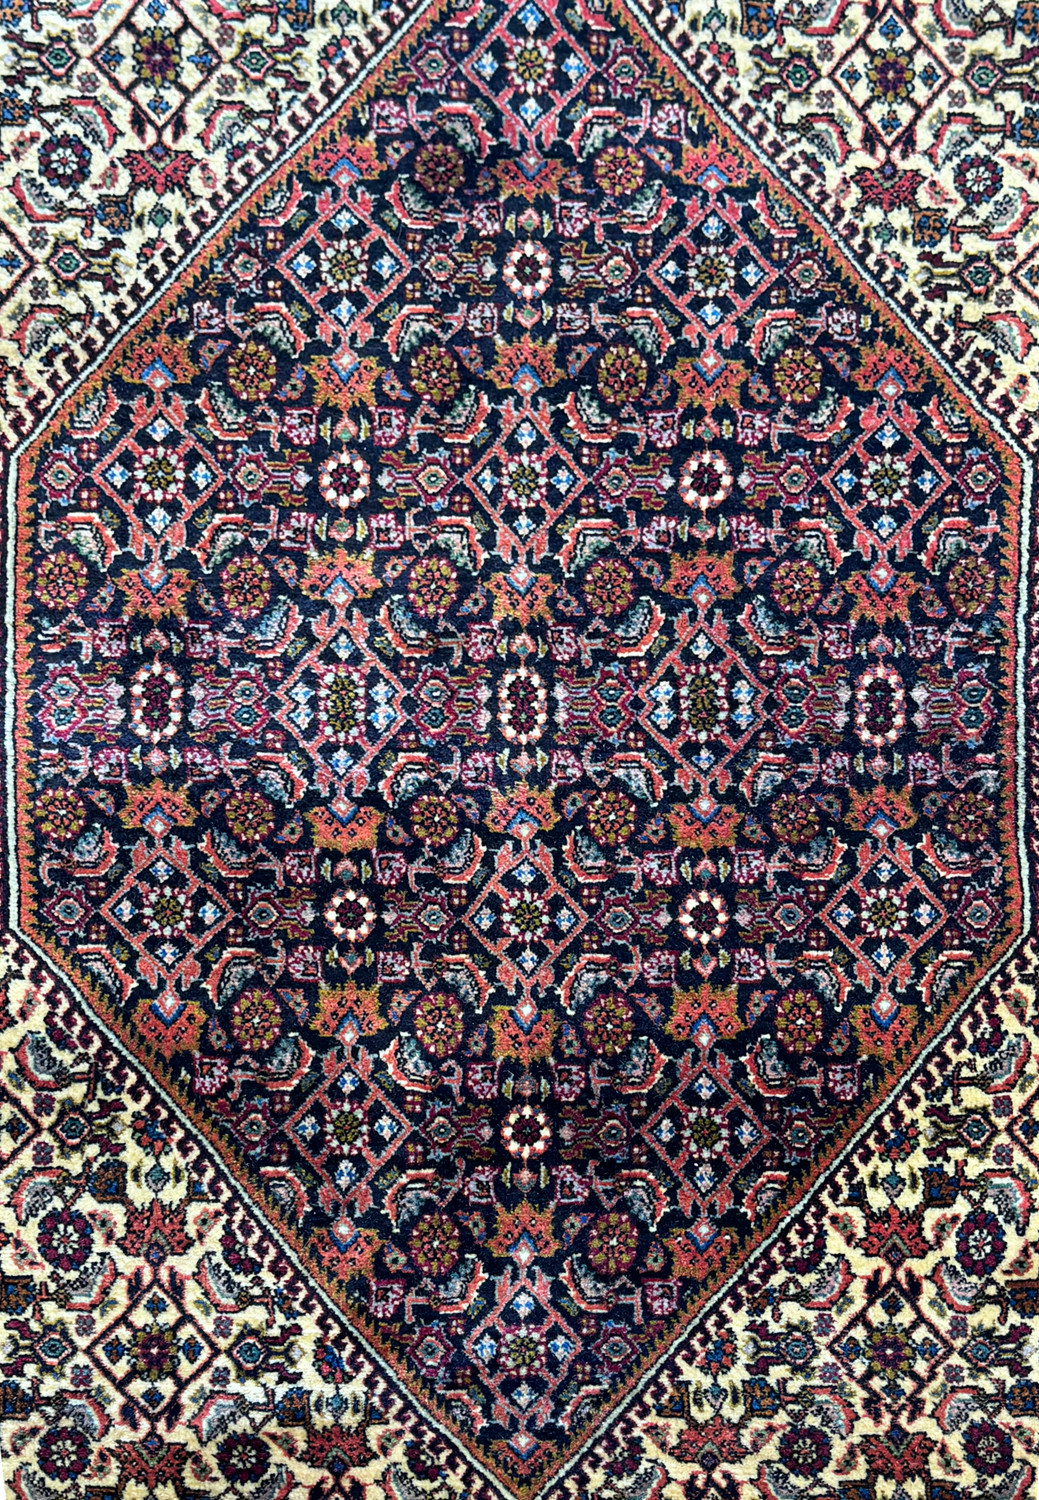 A perspective shot of the Persian Bijar rug, with the camera angle highlighting the rug’s texture and the rich, saturated colors of the detailed patterns, as the rug gently rolls over an edge